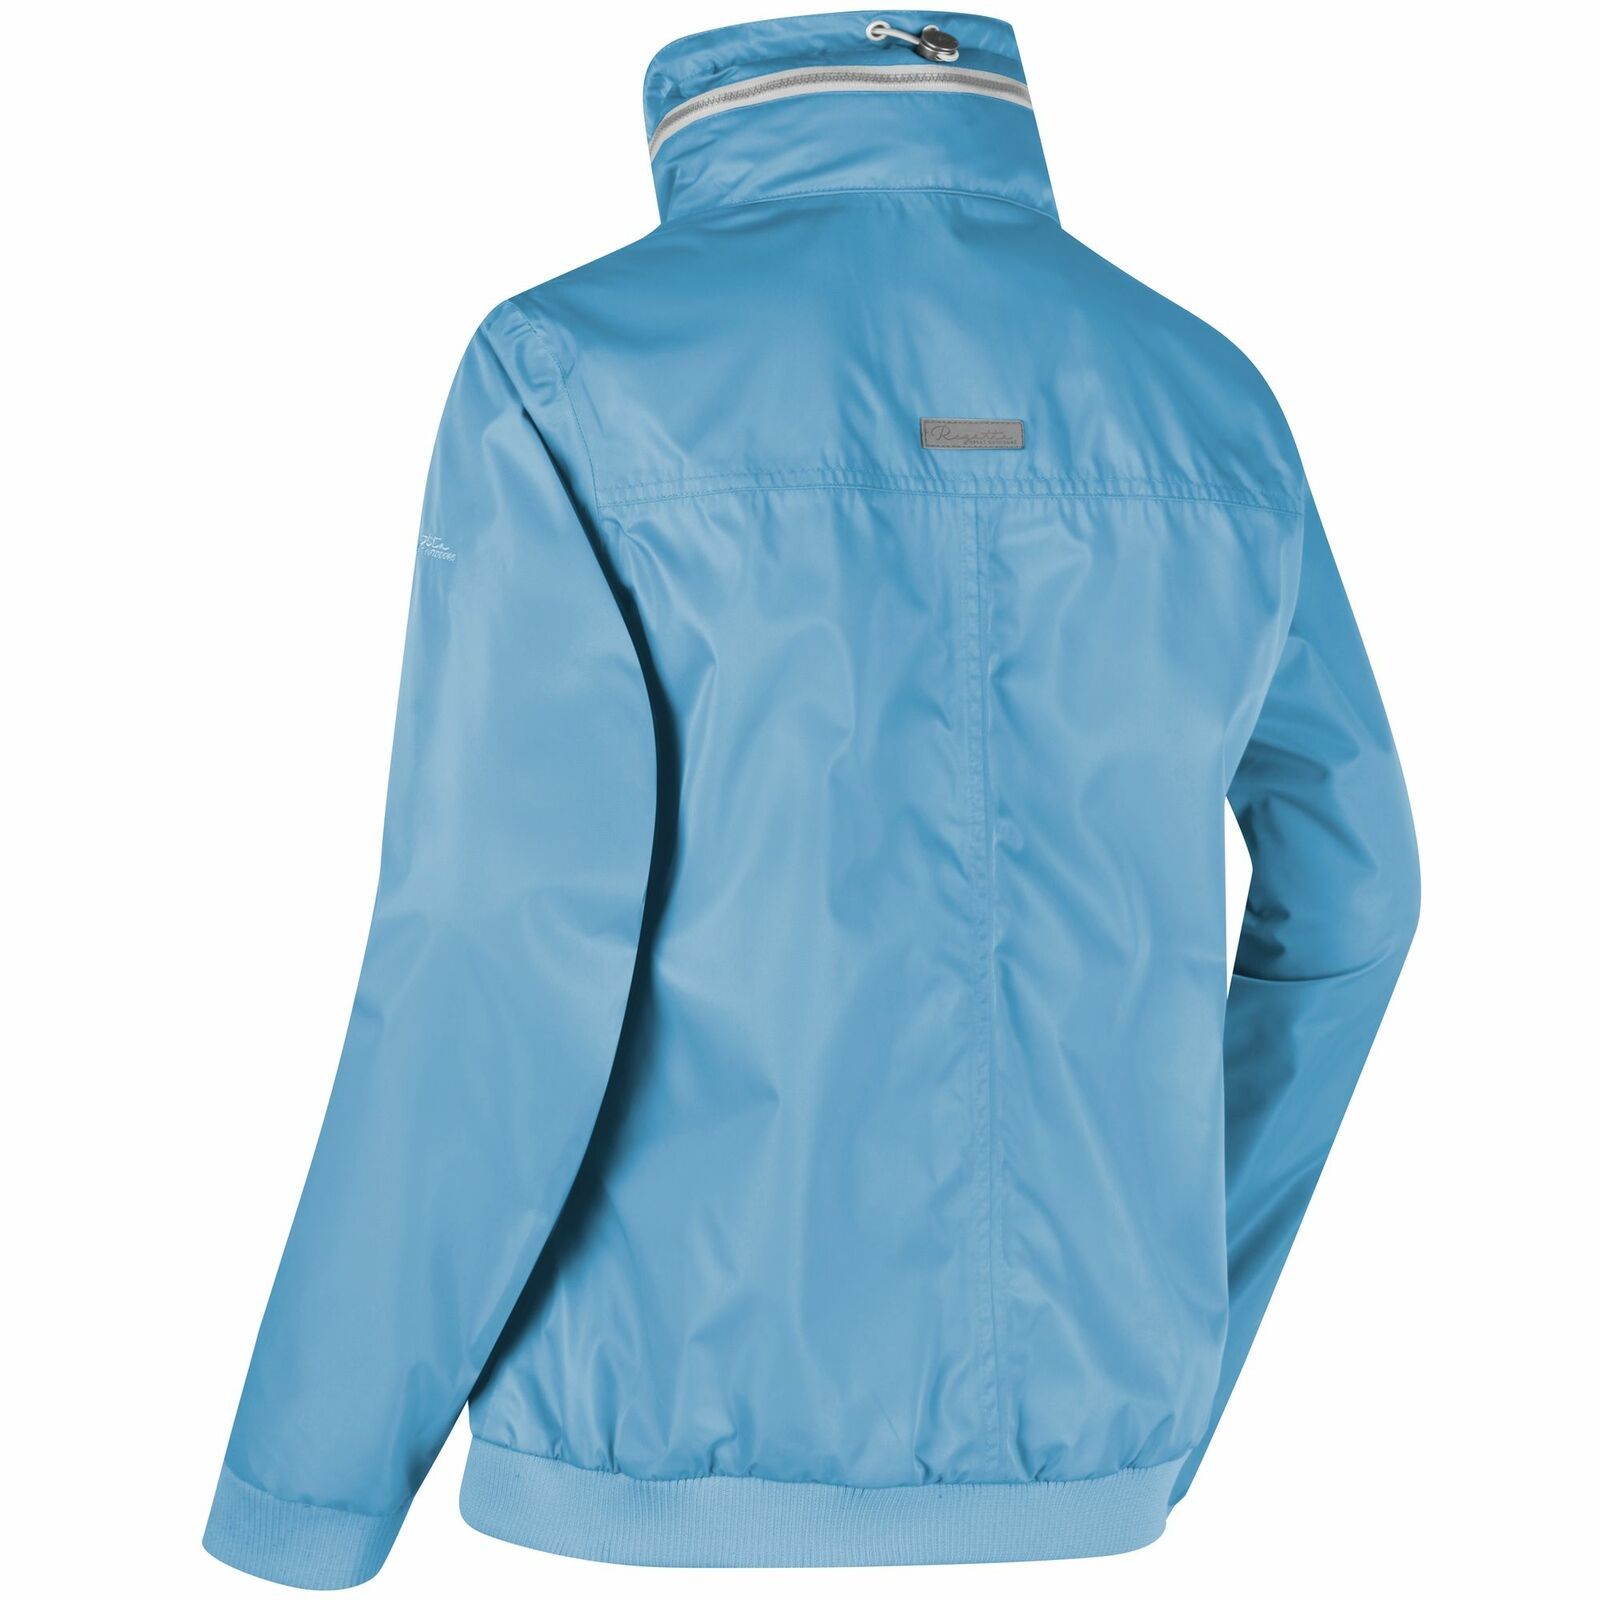 100% Polyester. The high-shine Kadisha bomber jacket is waterproof and breathable with a neat zip-away hood. This stylish summer cover up uses ISOTEX 5,000 fabric technology with sealed seams and a DWR (Durable Water Repellent) finish. With `rose gold` zips and poppers, ribbed fabric at the waist and cuffs for a shapely fit and a small Regatta badge on the hem. Regatta Womens sizing (bust approx): 6 (30in/76cm), 8 (32in/81cm), 10 (34in/86cm), 12 (36in/92cm), 14 (38in/97cm), 16 (40in/102cm), 18 (43in/109cm), 20 (45in/114cm), 22 (48in/122cm), 24 (50in/127cm), 26 (52in/132cm), 28 (54in/137cm), 30 (56in/142cm), 32 (58in/147cm), 34 (60in/152cm), 36 (62in/158cm).